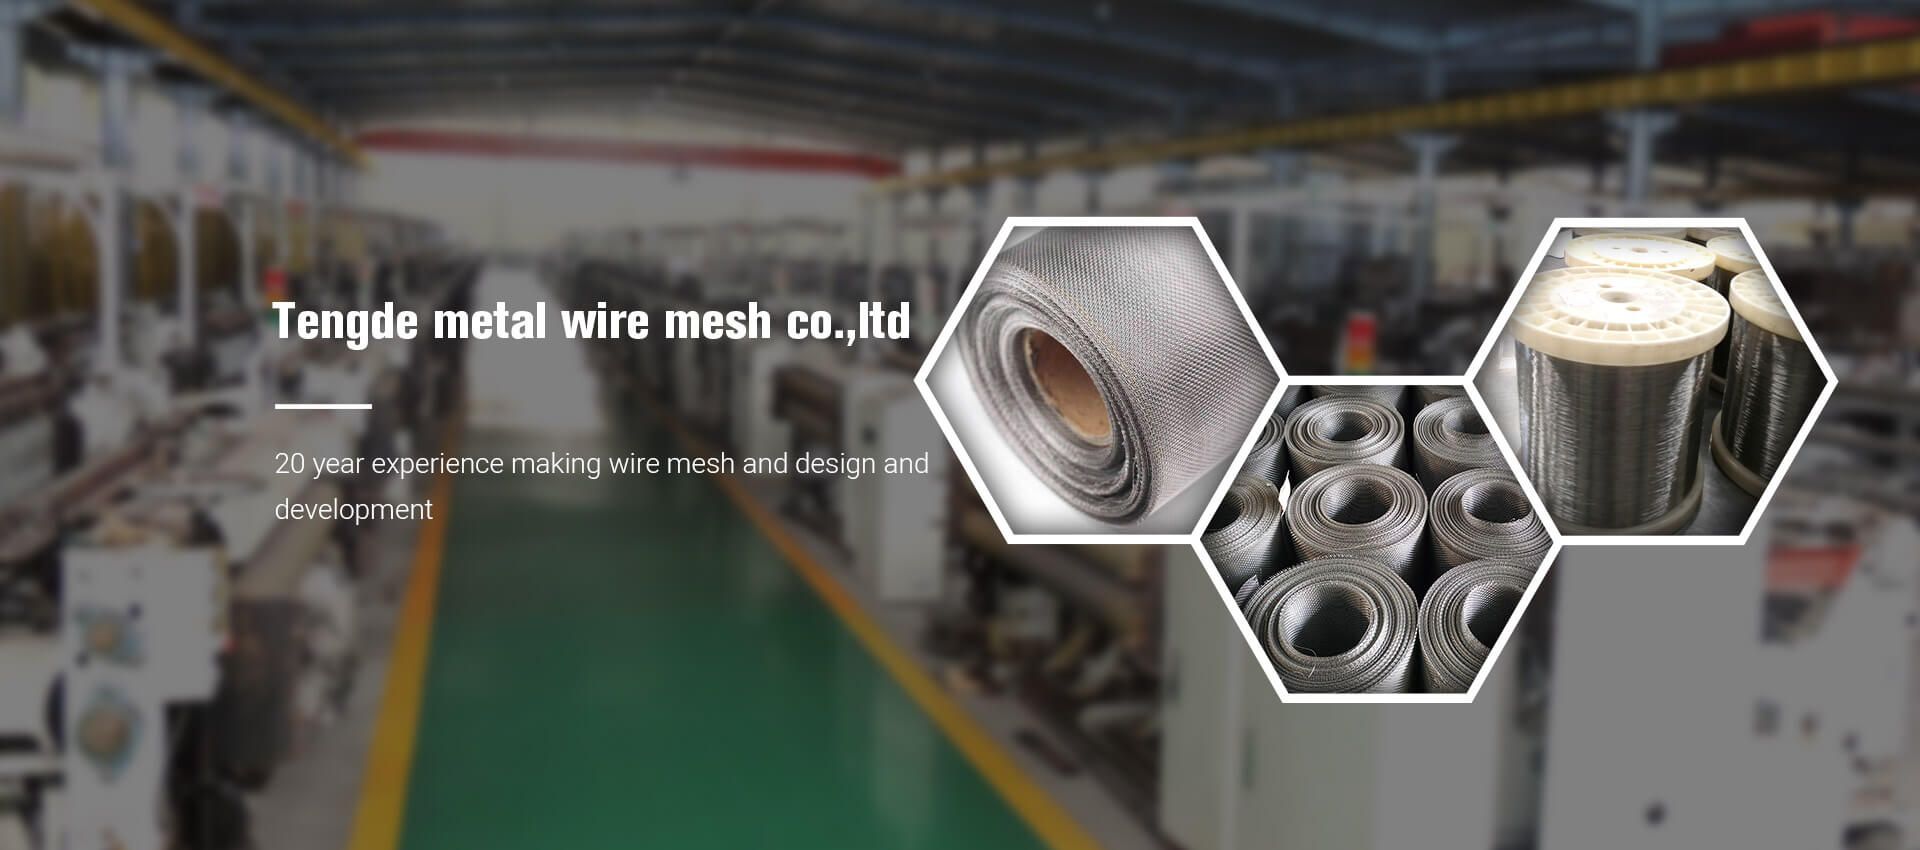 Anping County Tengde Metal Wire Mesh Products Co., Ltd.